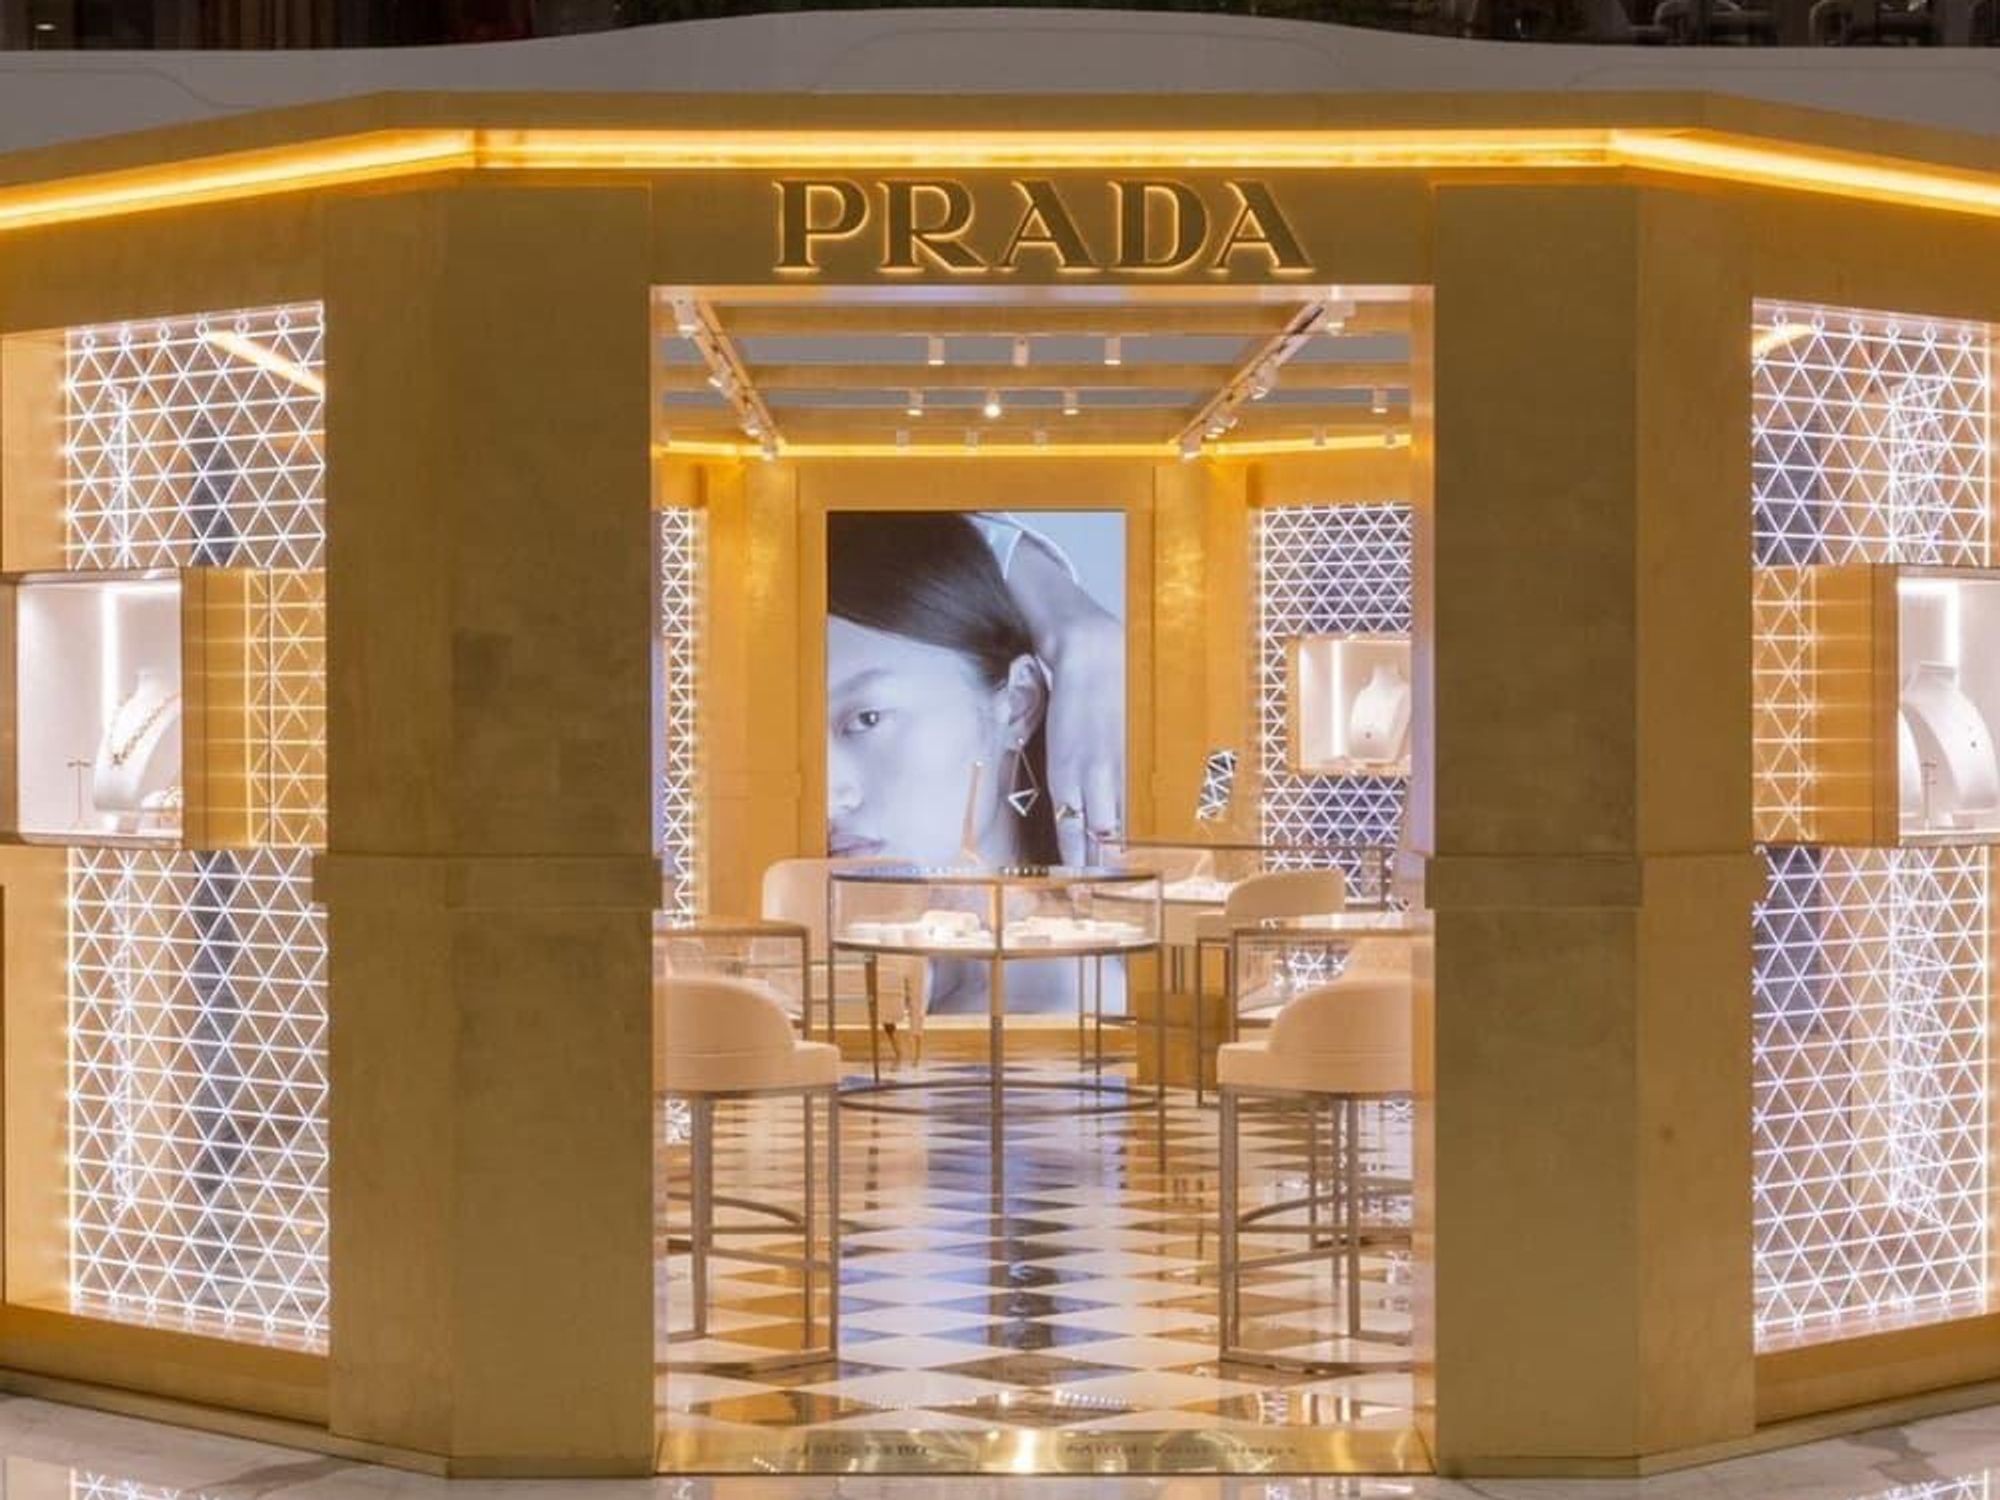 Prada Holiday Gifts Guide 2020 on Instagram